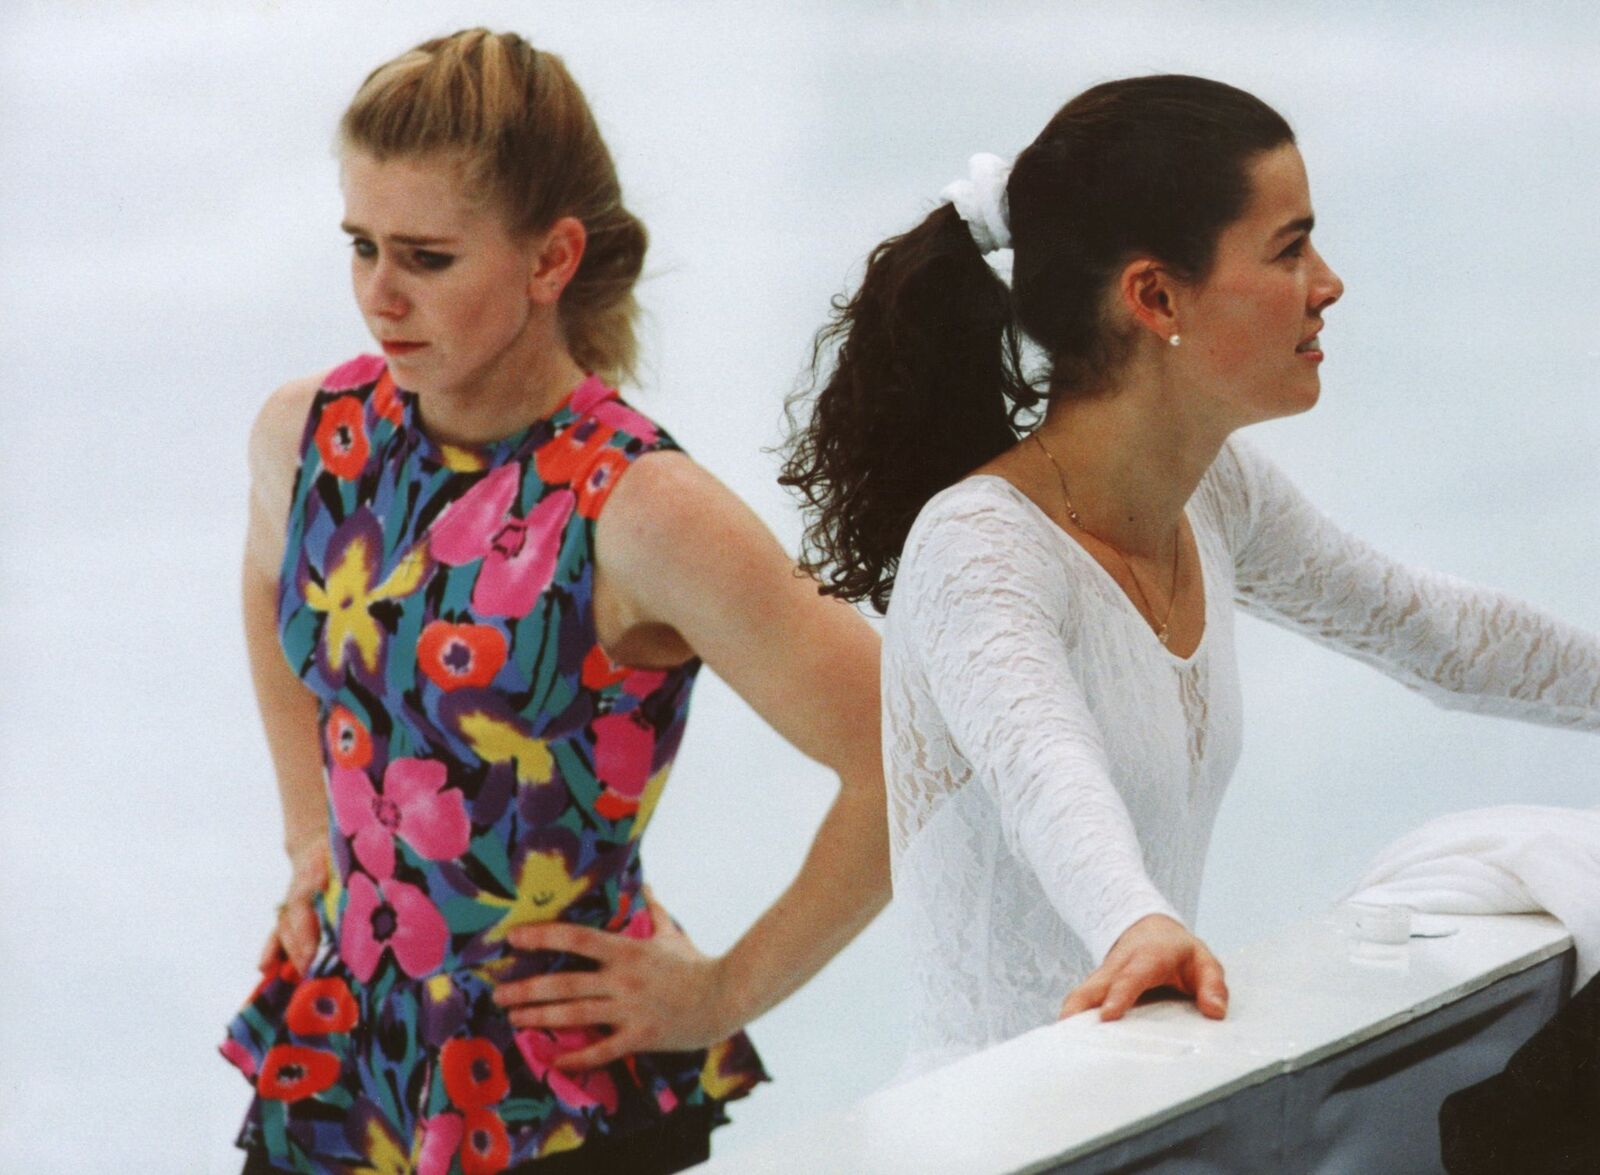 Tonya Harding and Nancy Kerrigan training on February 17th, 1994 in Hamar a month after Kerrigan was attacked in Detroit | Source: Getty Images